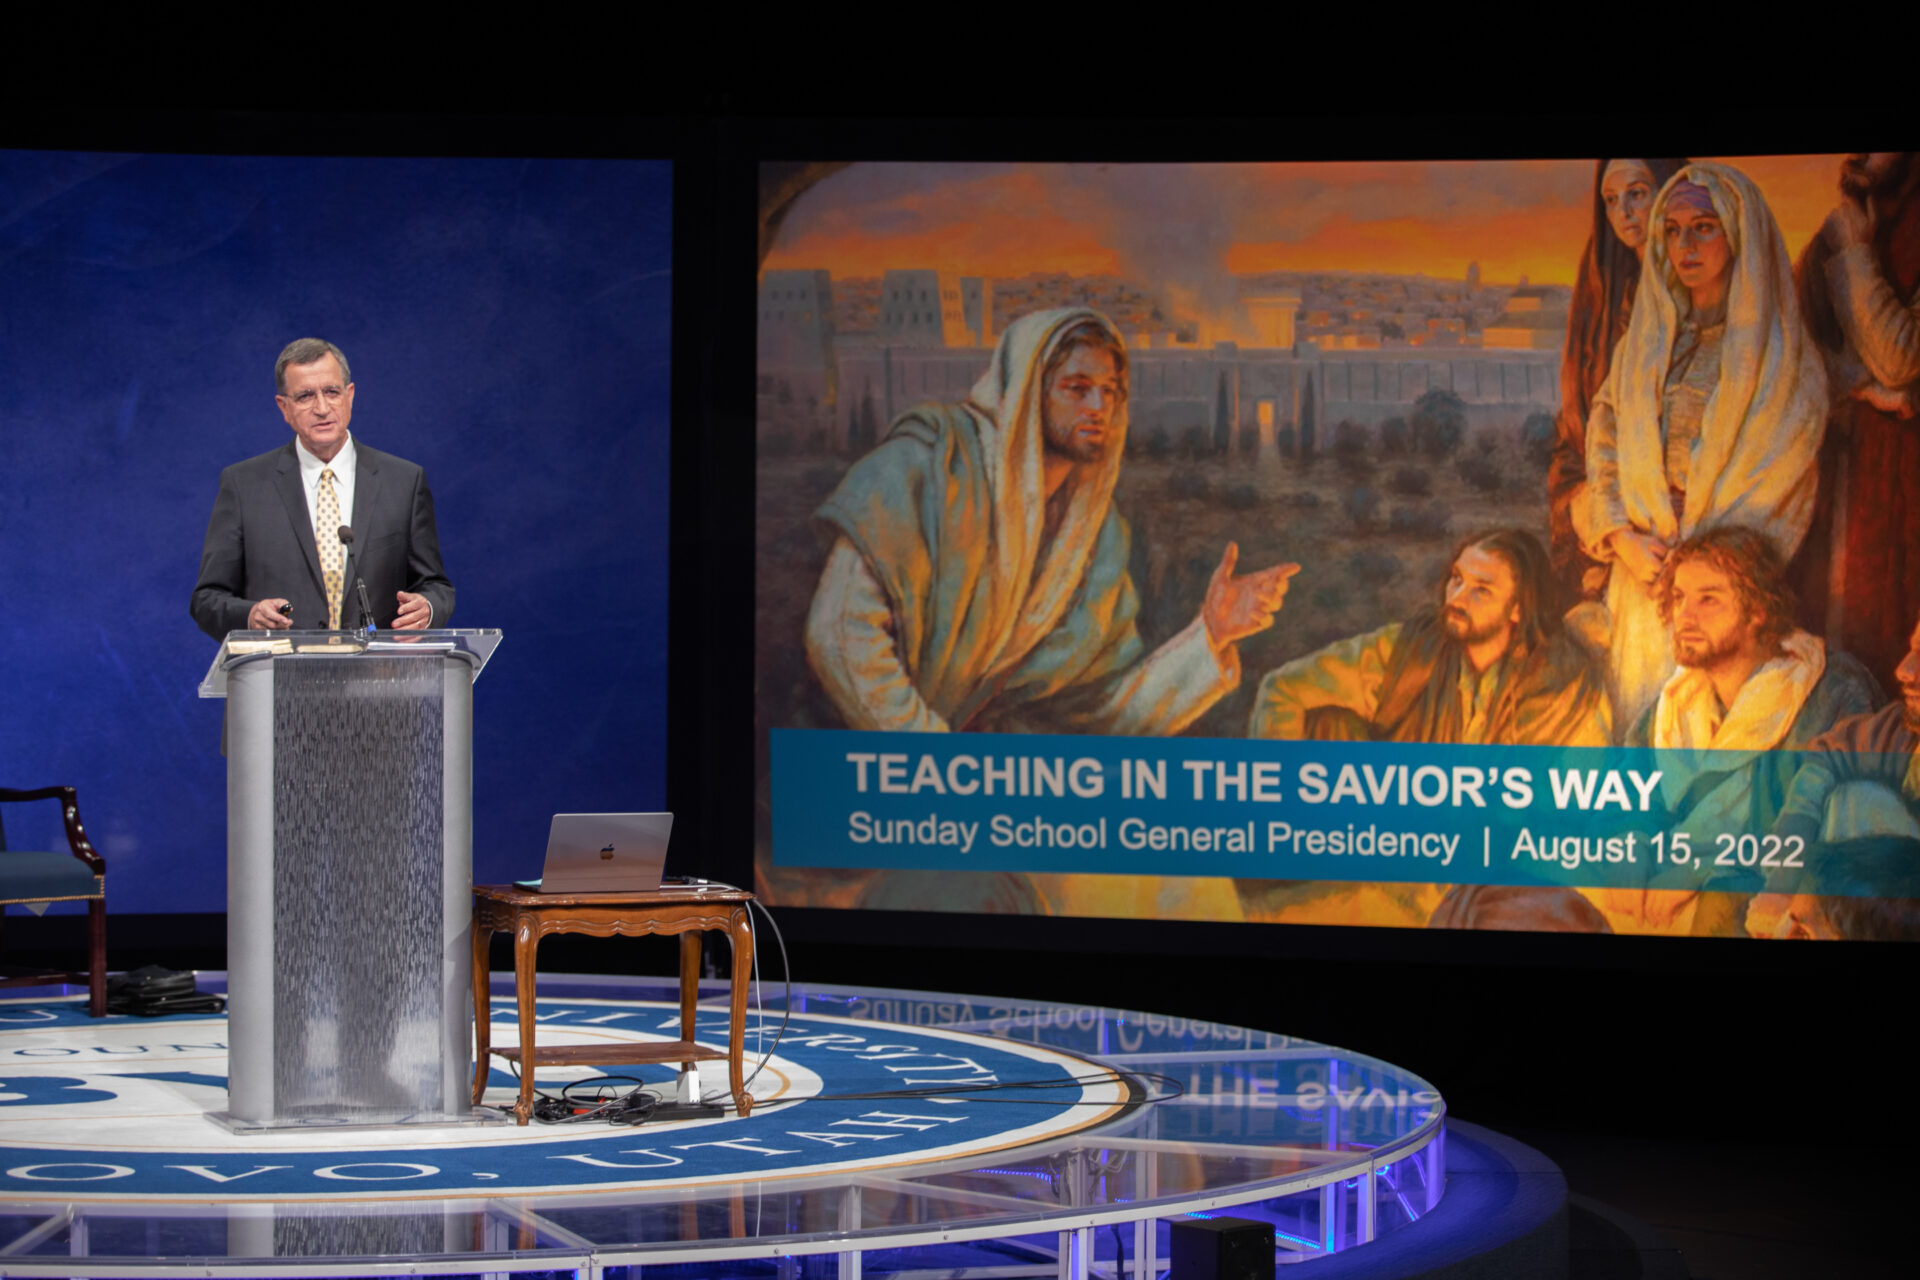 Education Week: Sunday School Presidency emphasizes Christ-centered teaching with new manual